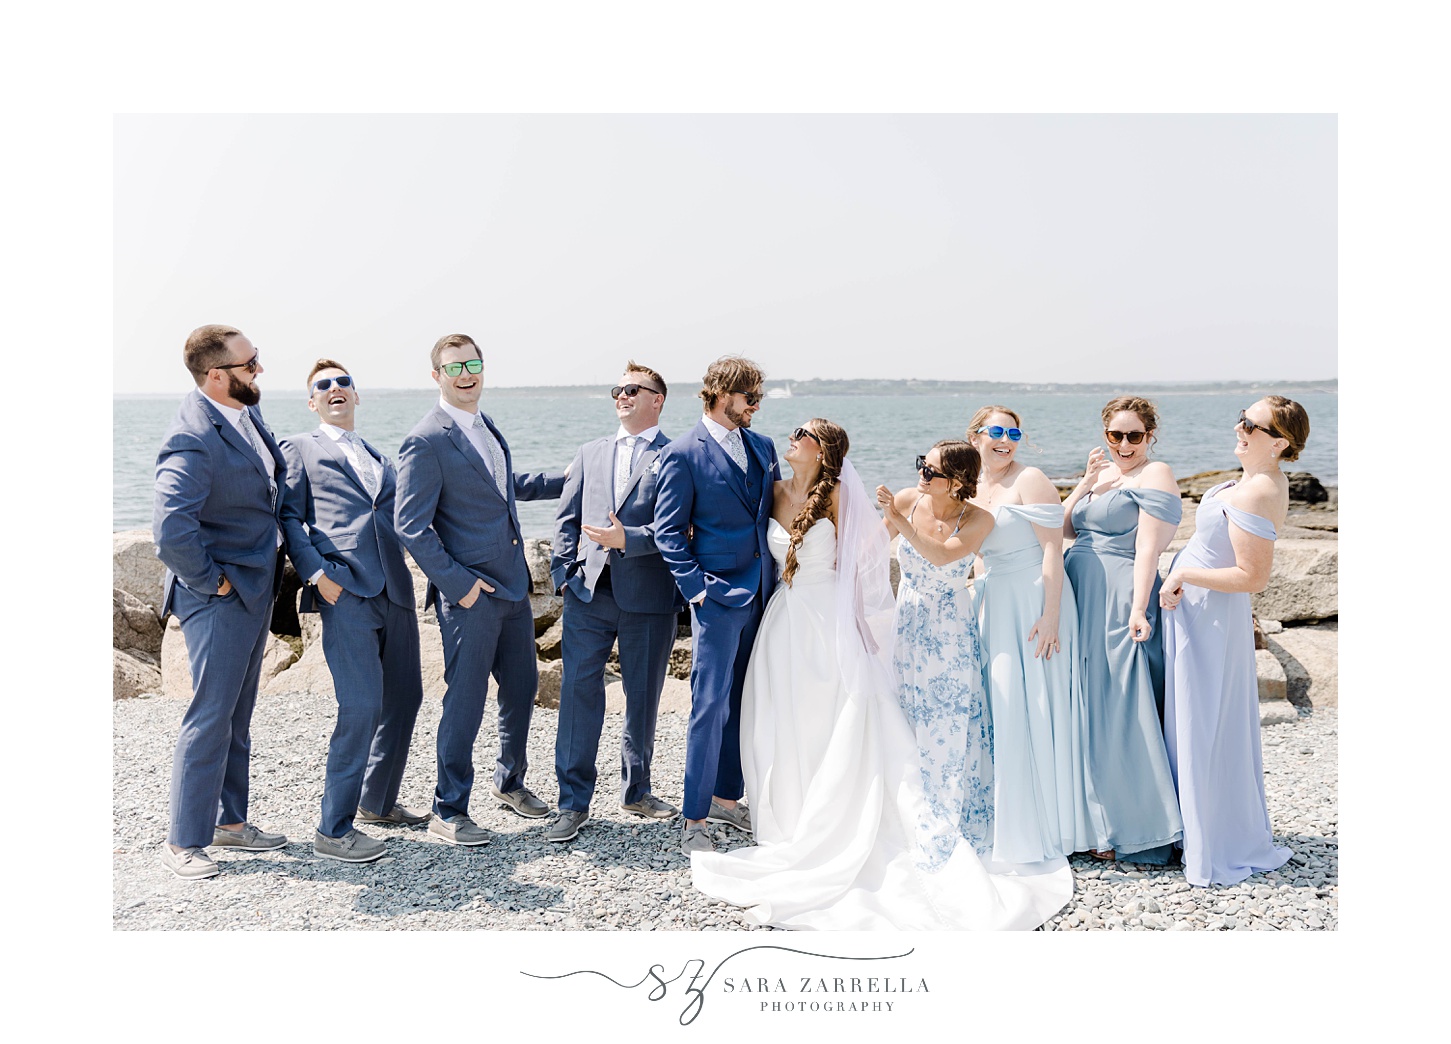 bride and groom hug with wedding party in navy suits and light blue dresses around them